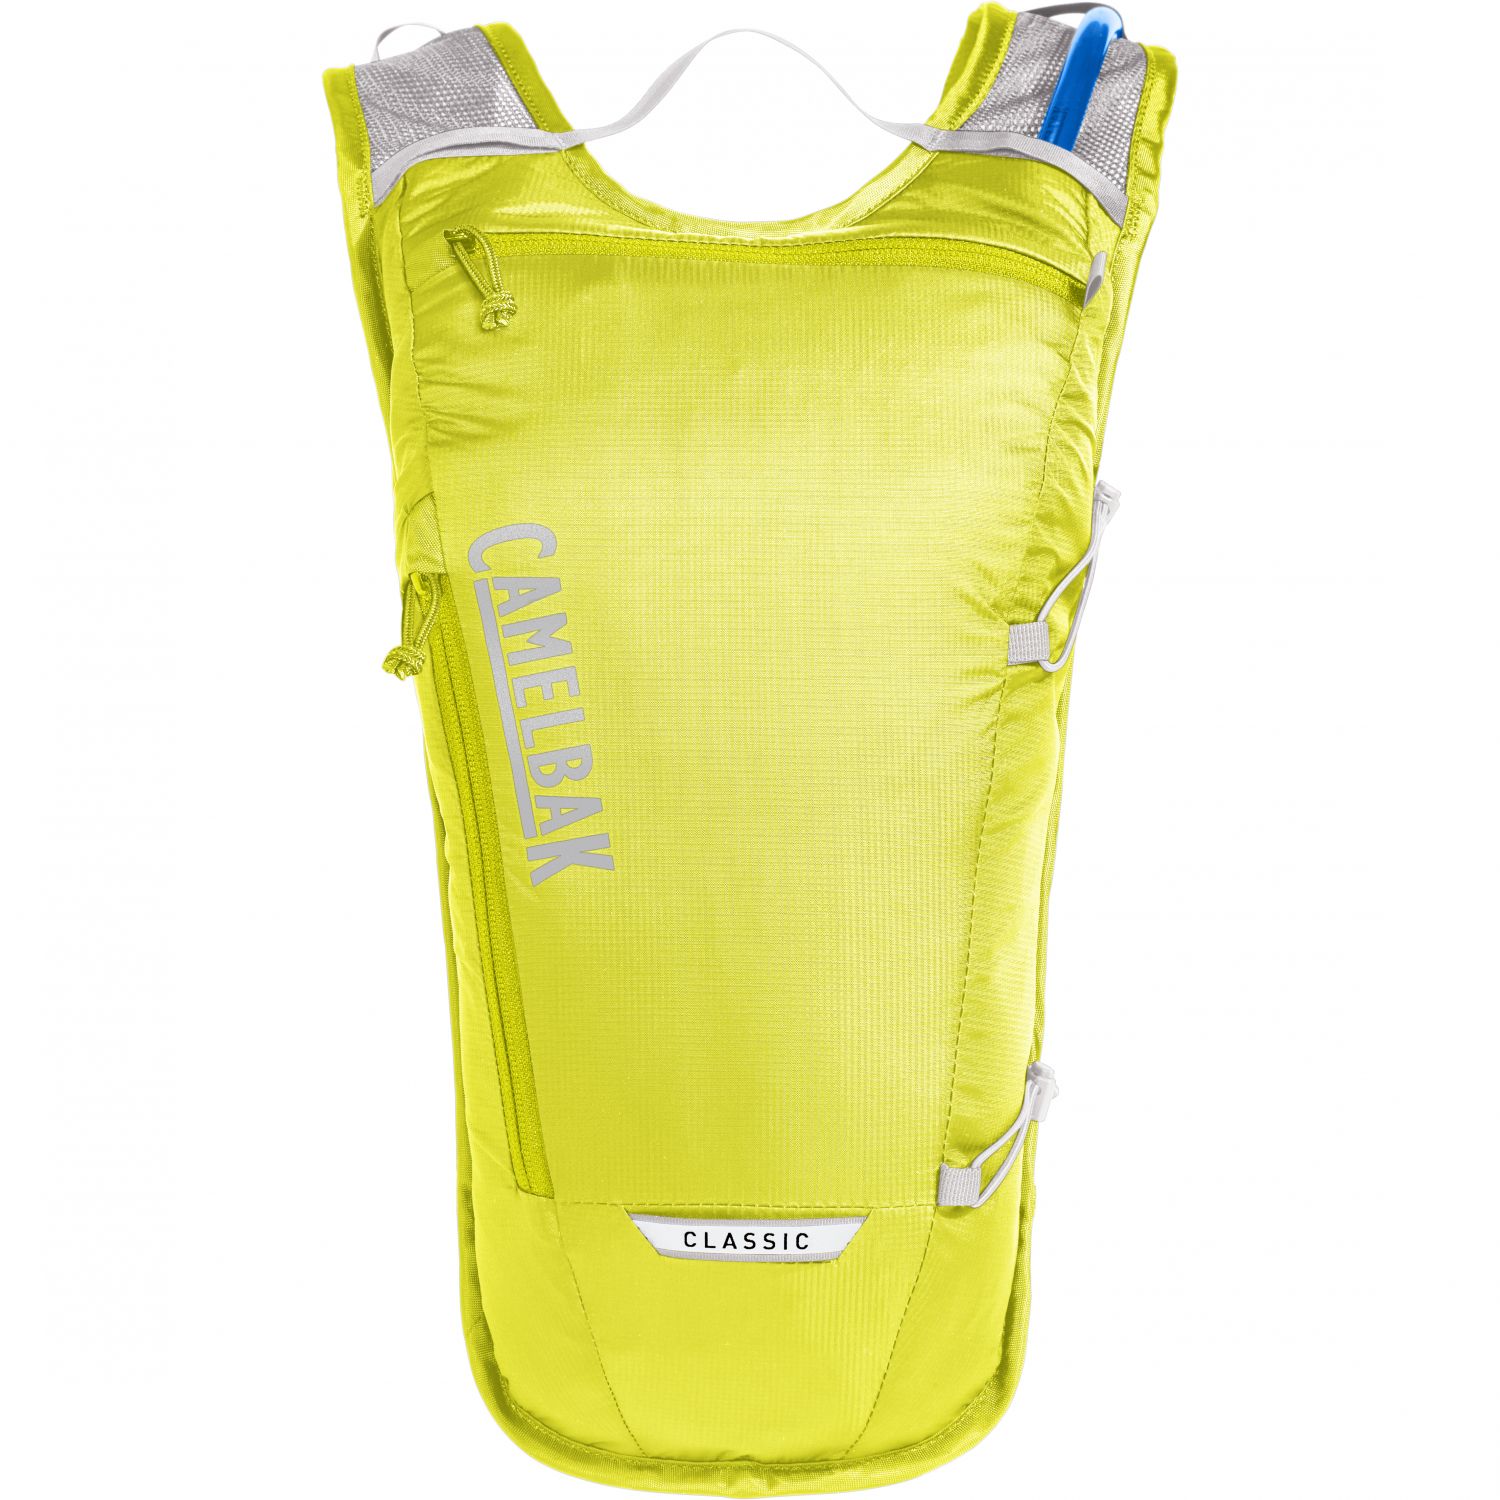 CamelBak Classic Light, hydration backpack, 2L, safety yellow/silver